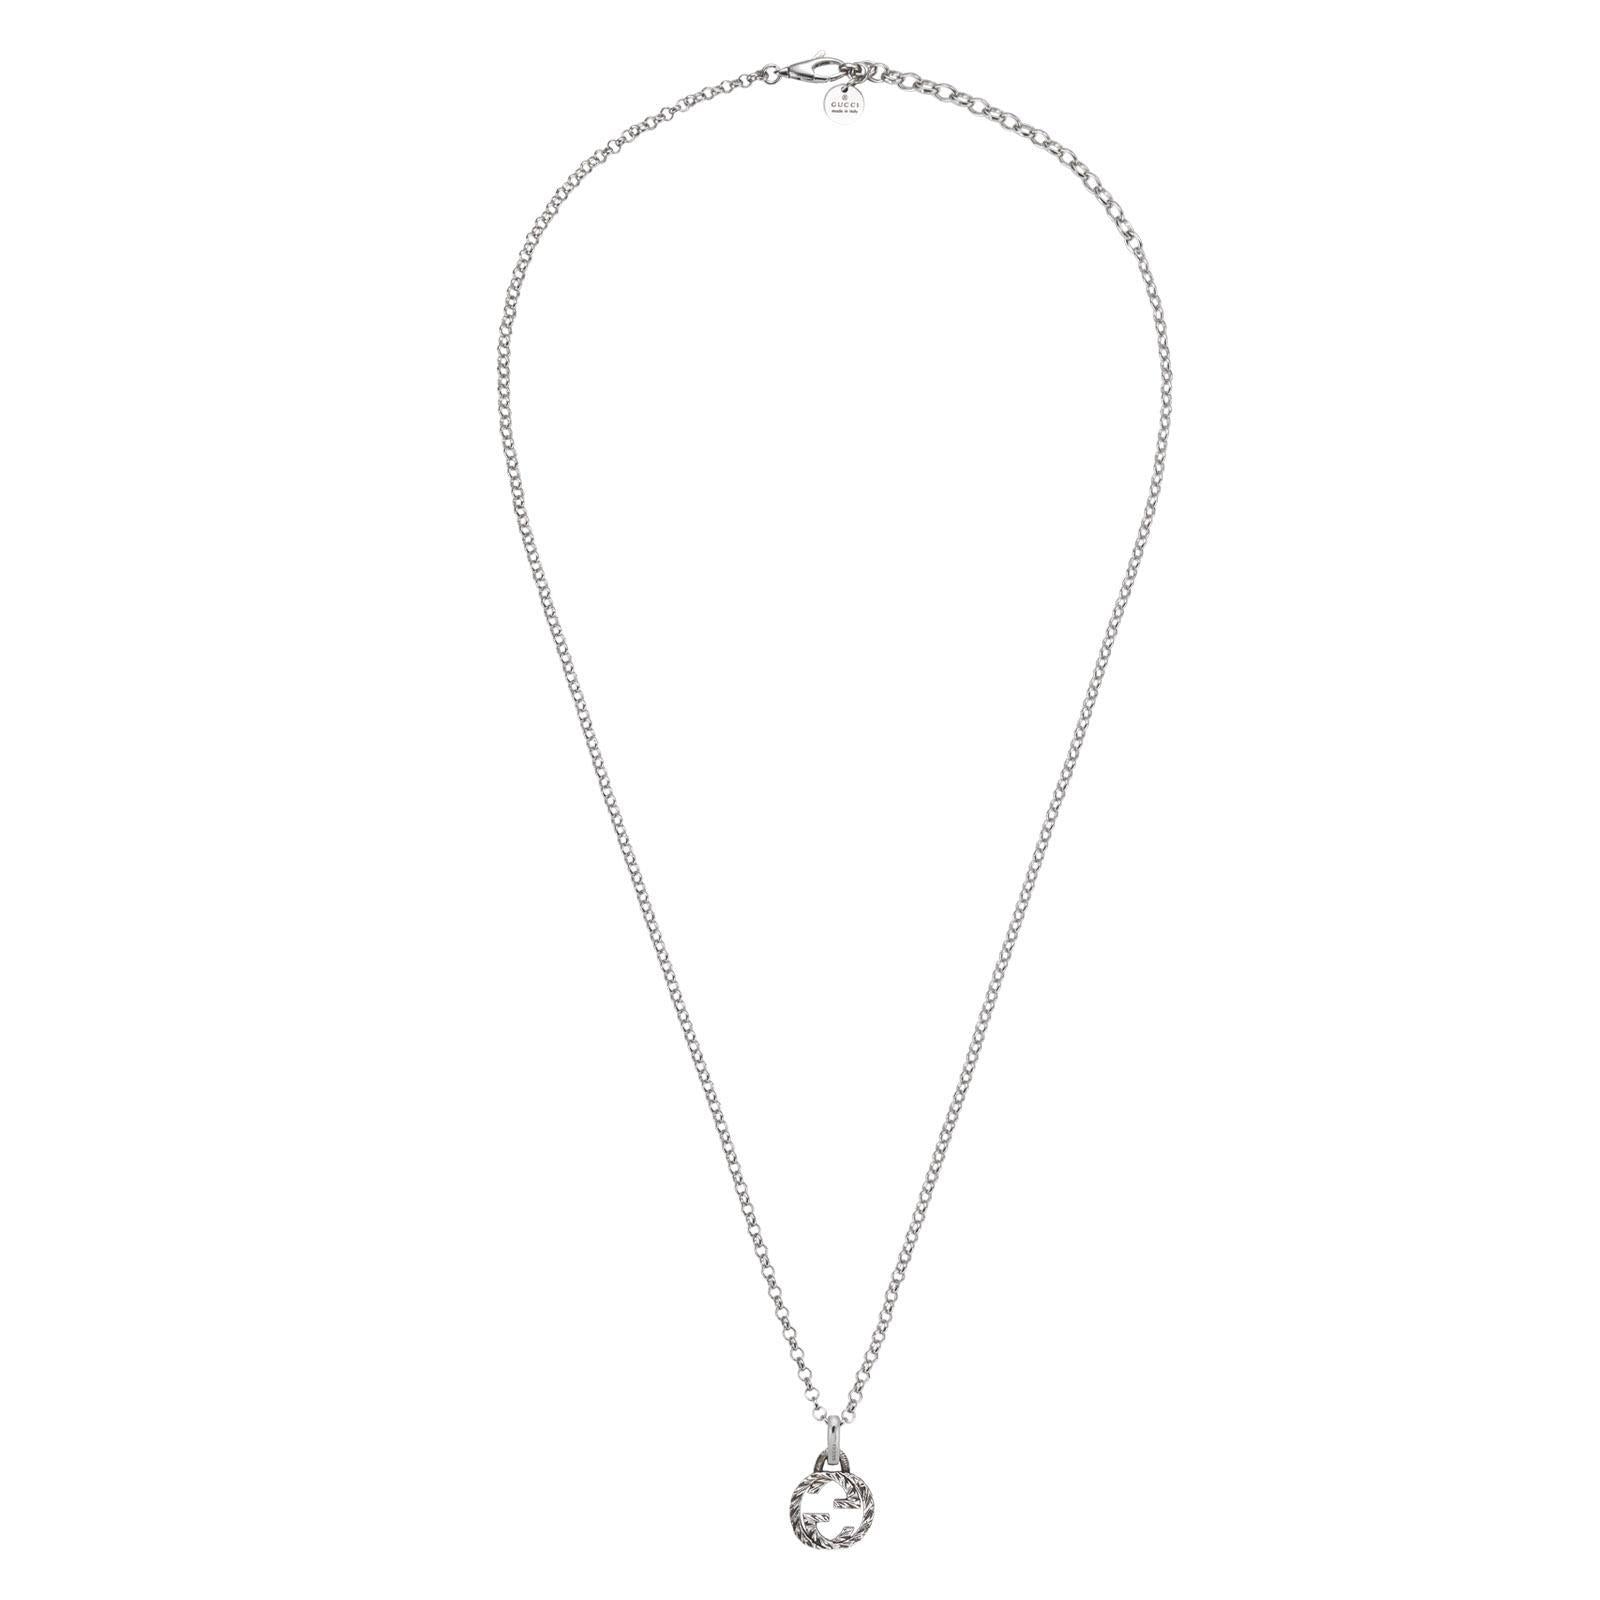 Gucci Britt Silver Double G Necklace White PNG Image Transparent PNG Free  Download On SeekPNG 